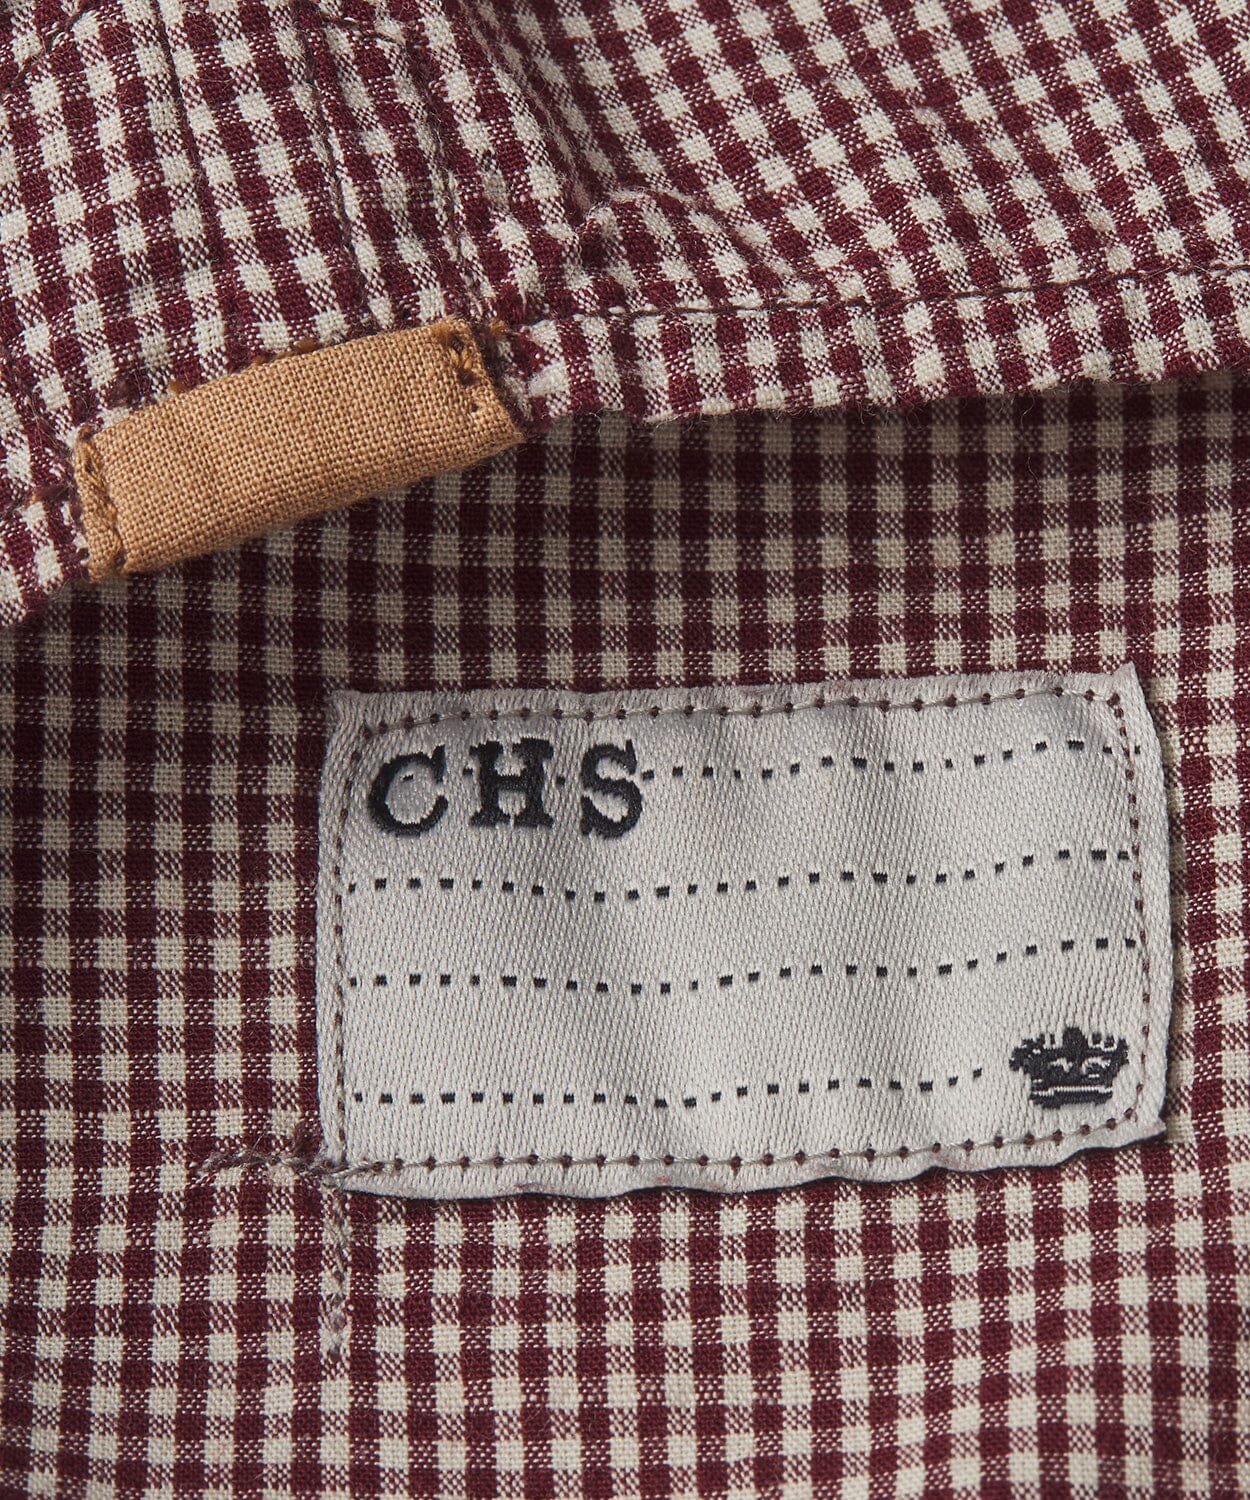 Excella Gingham Shirt Button Downs OOBE BRAND 